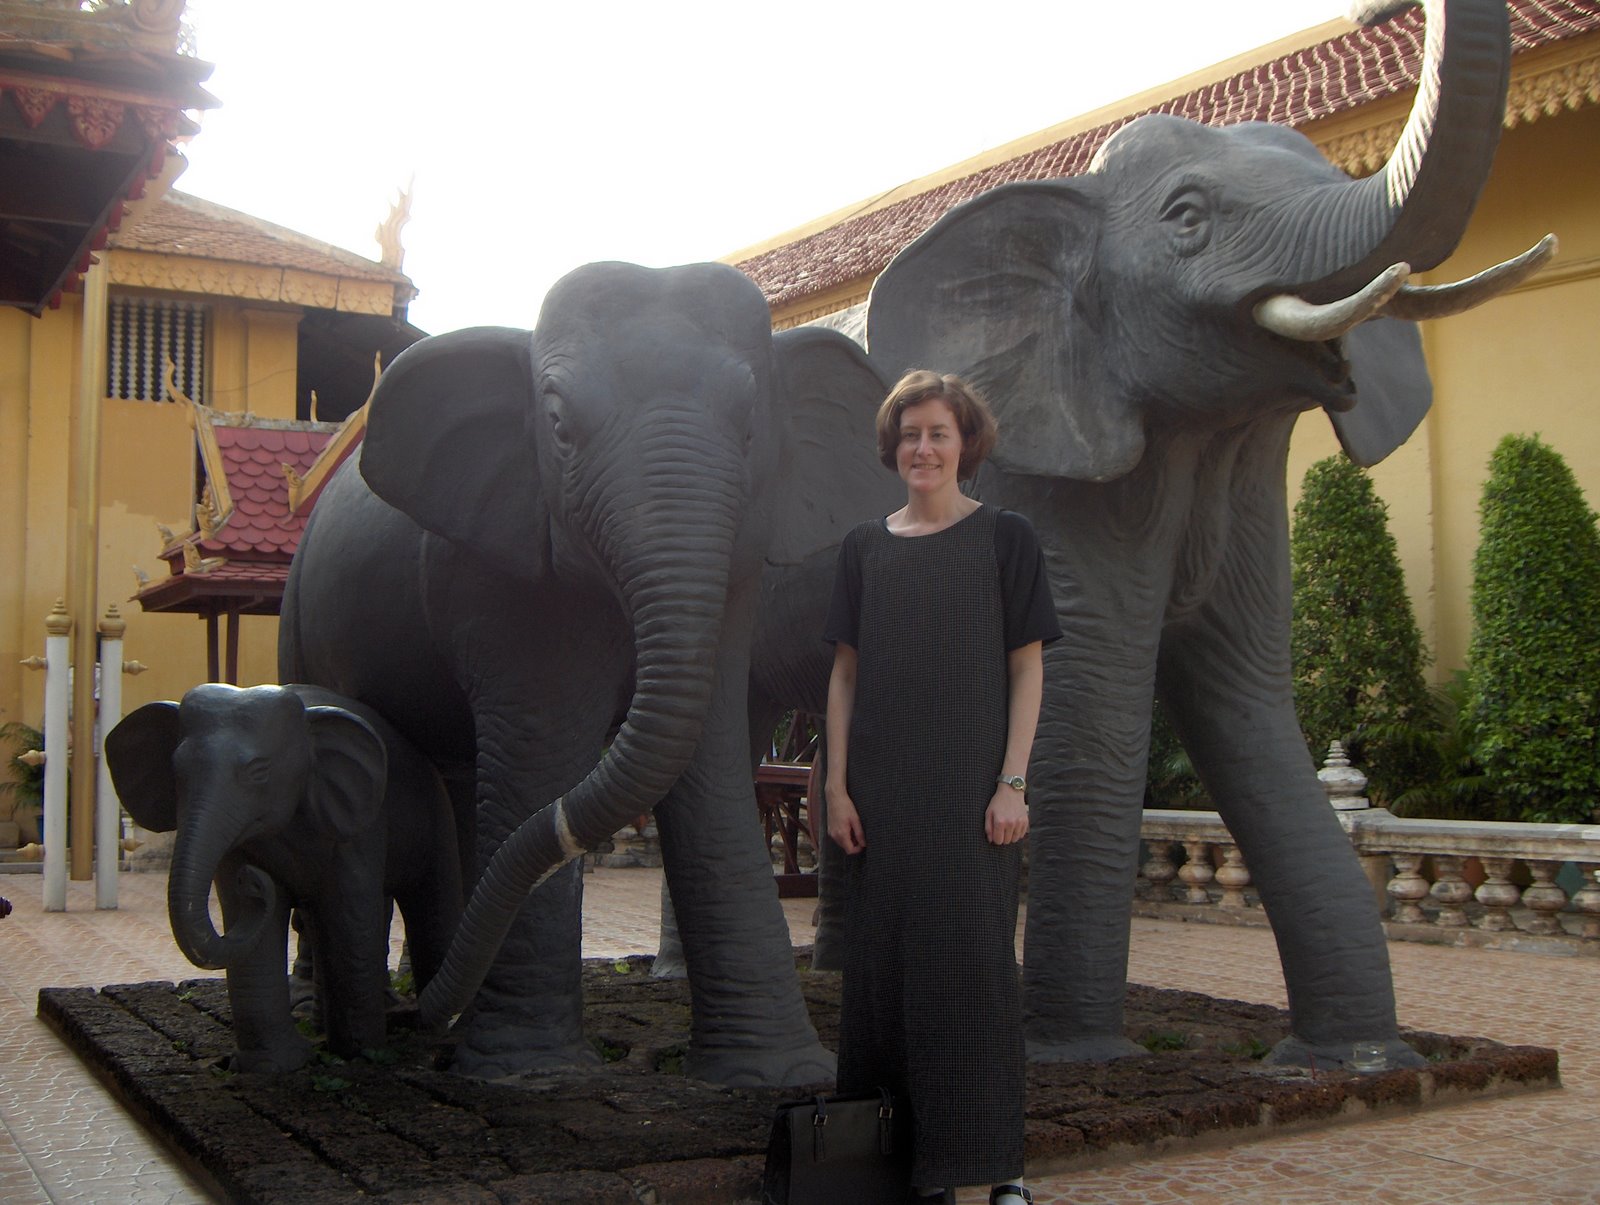 [Lisa+with+elephant+statues+at+Silver+Pagoda.JPG]